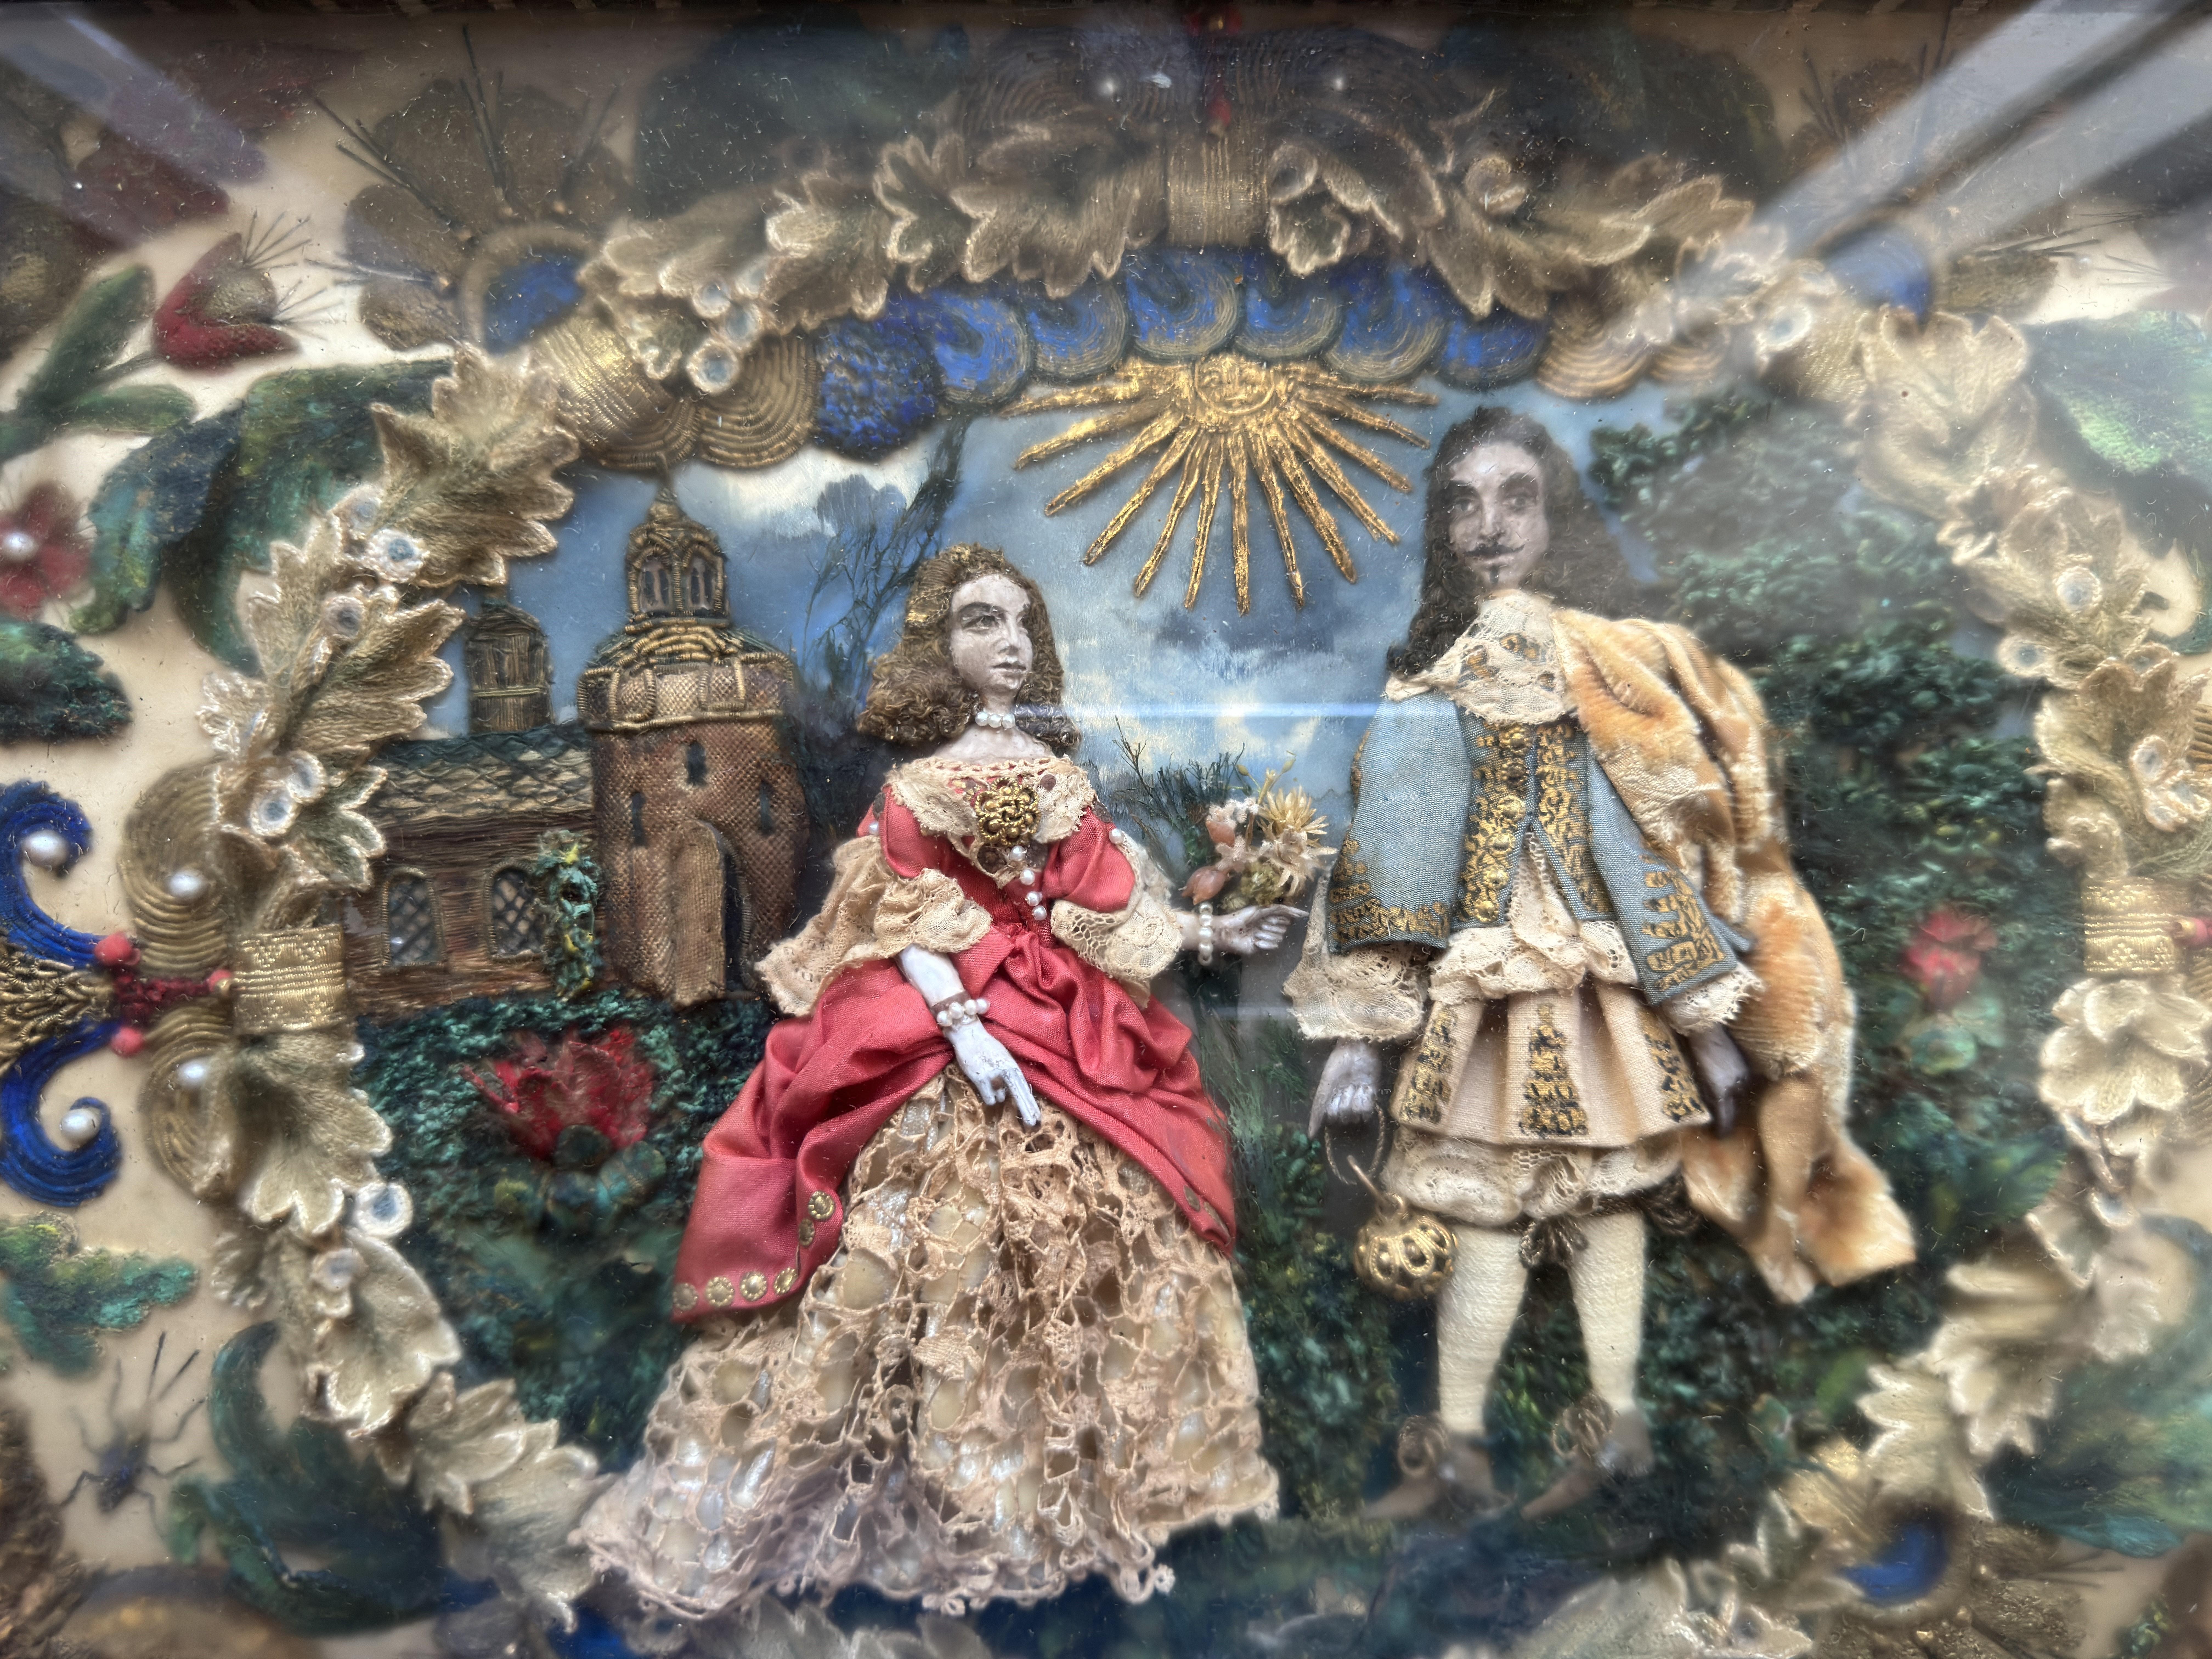 A very fine panel of 'King Charles II and his favourite Lady' in the gardens of a Church / Castle. The bright colours of the raised stump work embroidery, and fine detail of the faces, bring to life this antique textile picture. The back of the